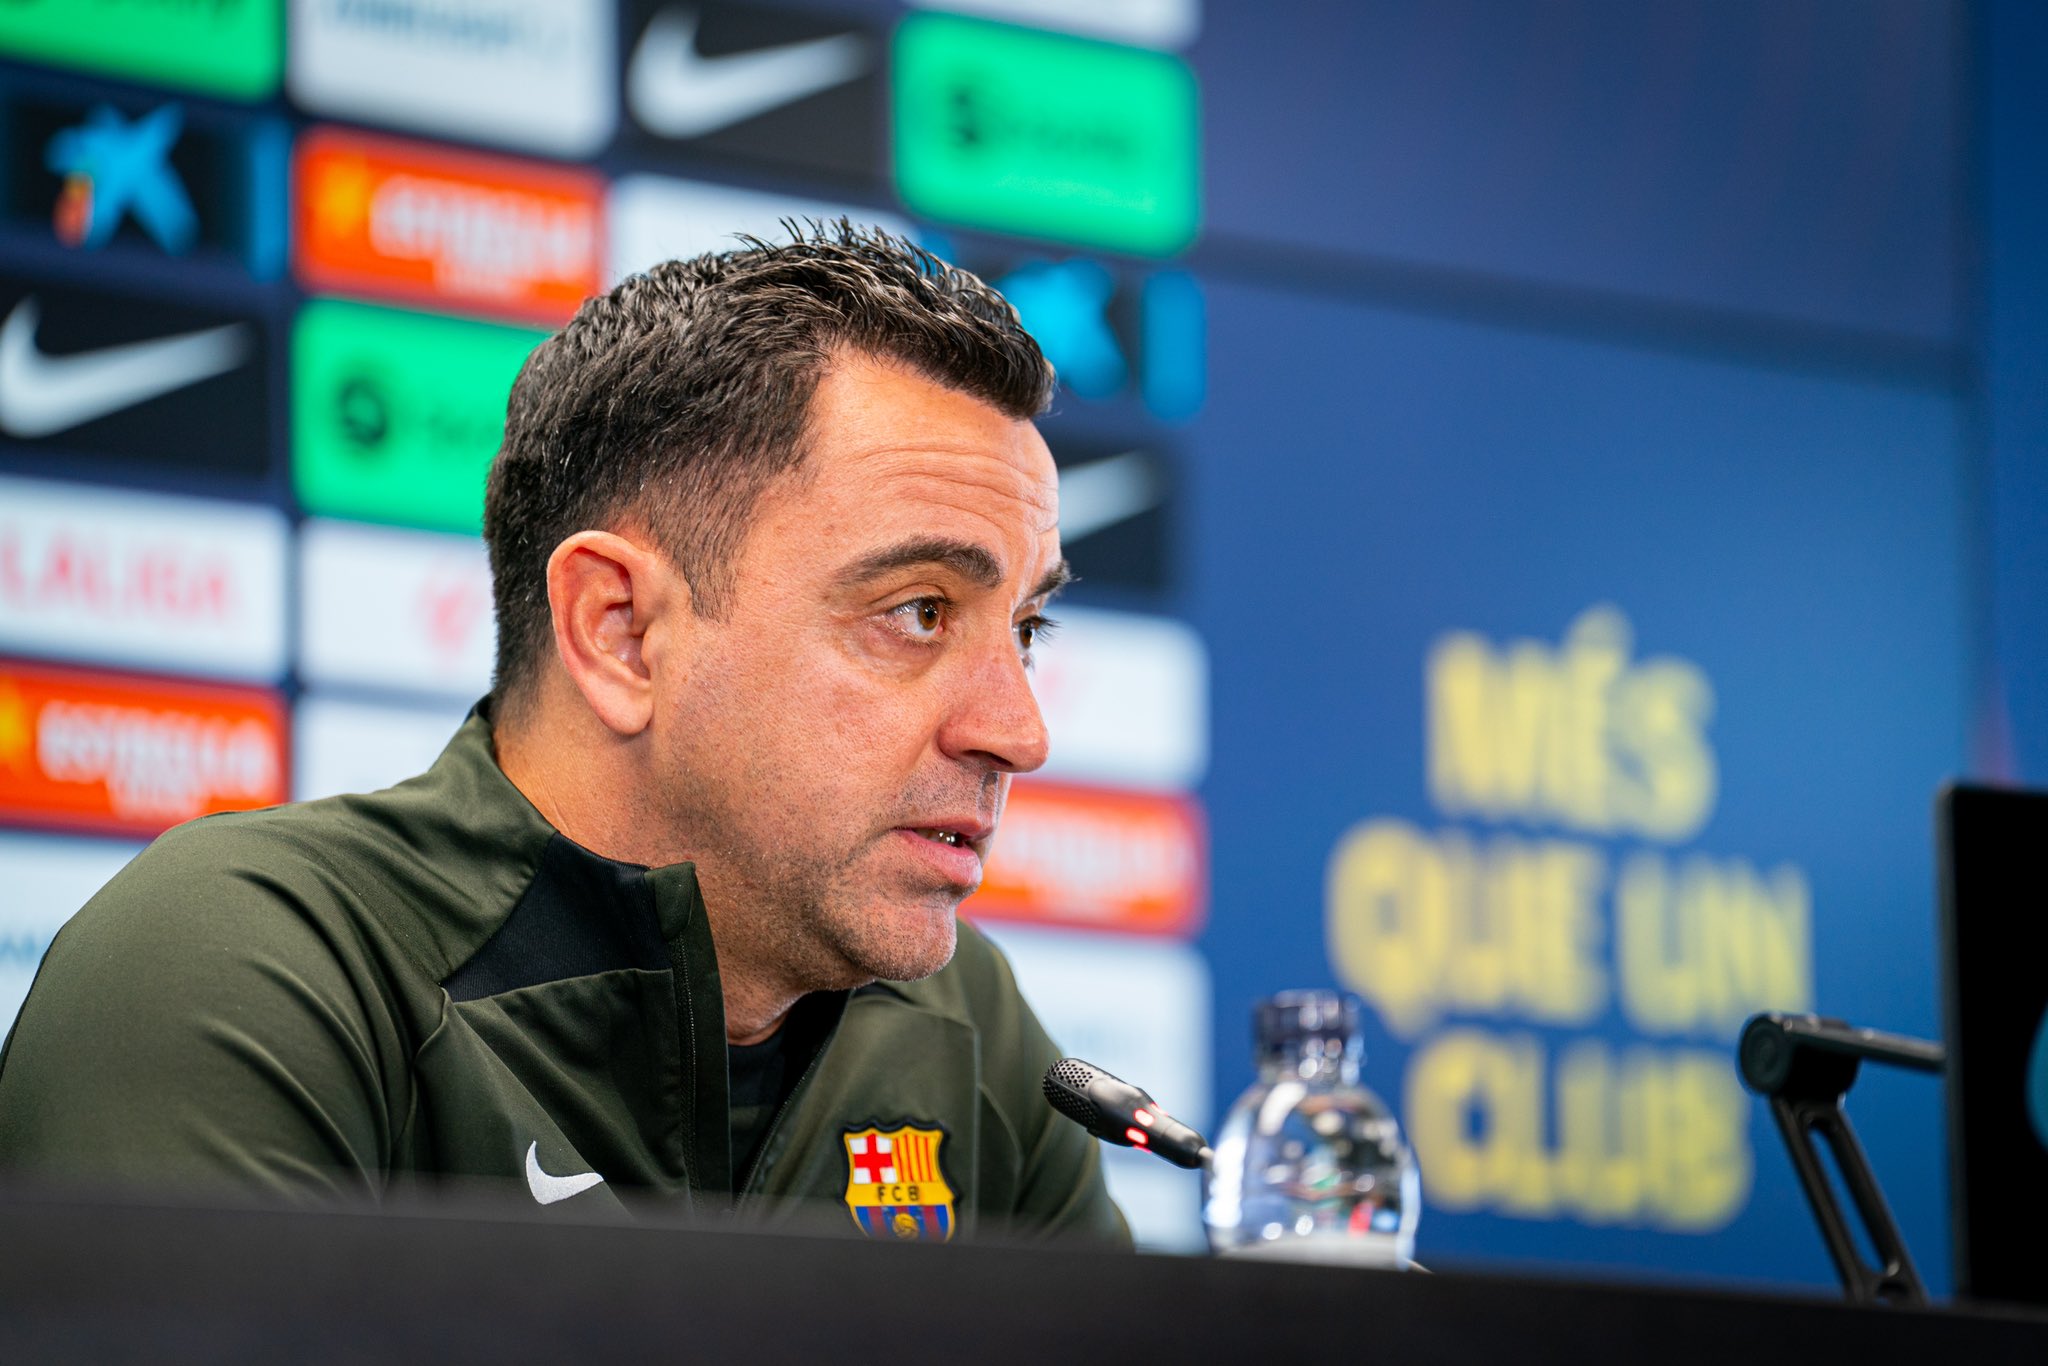 Xavi Hernandez jabs at VAR controversy and claims Barcelona deserved El Clasico win